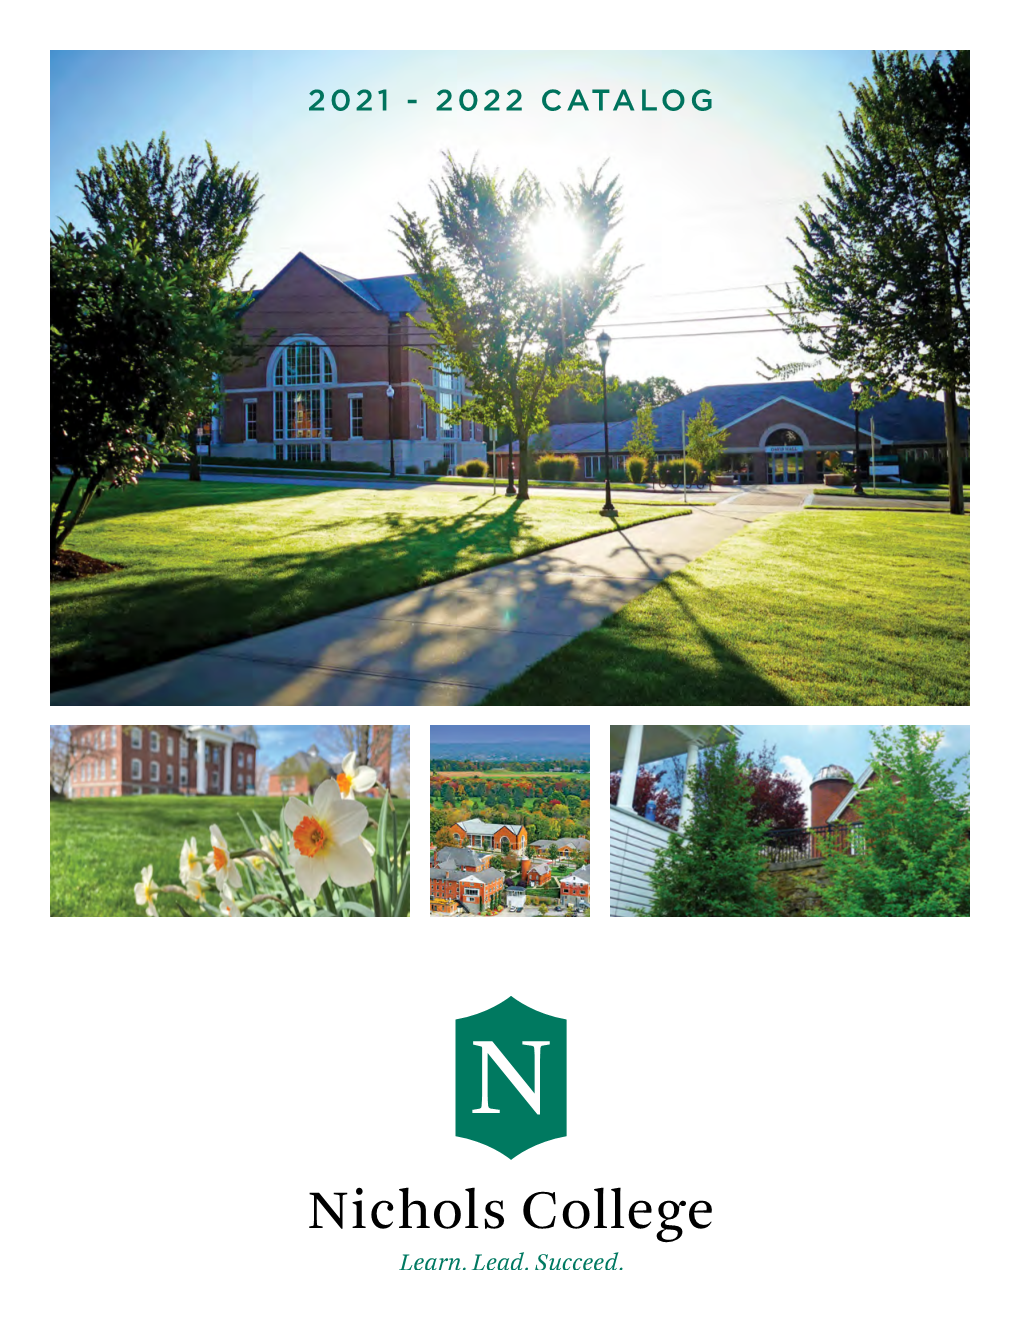 2021 - 2022 CATALOG This Publication Provides Information Concerning the Programs at Nichols College and Does Not Constitute a Contract with the Student